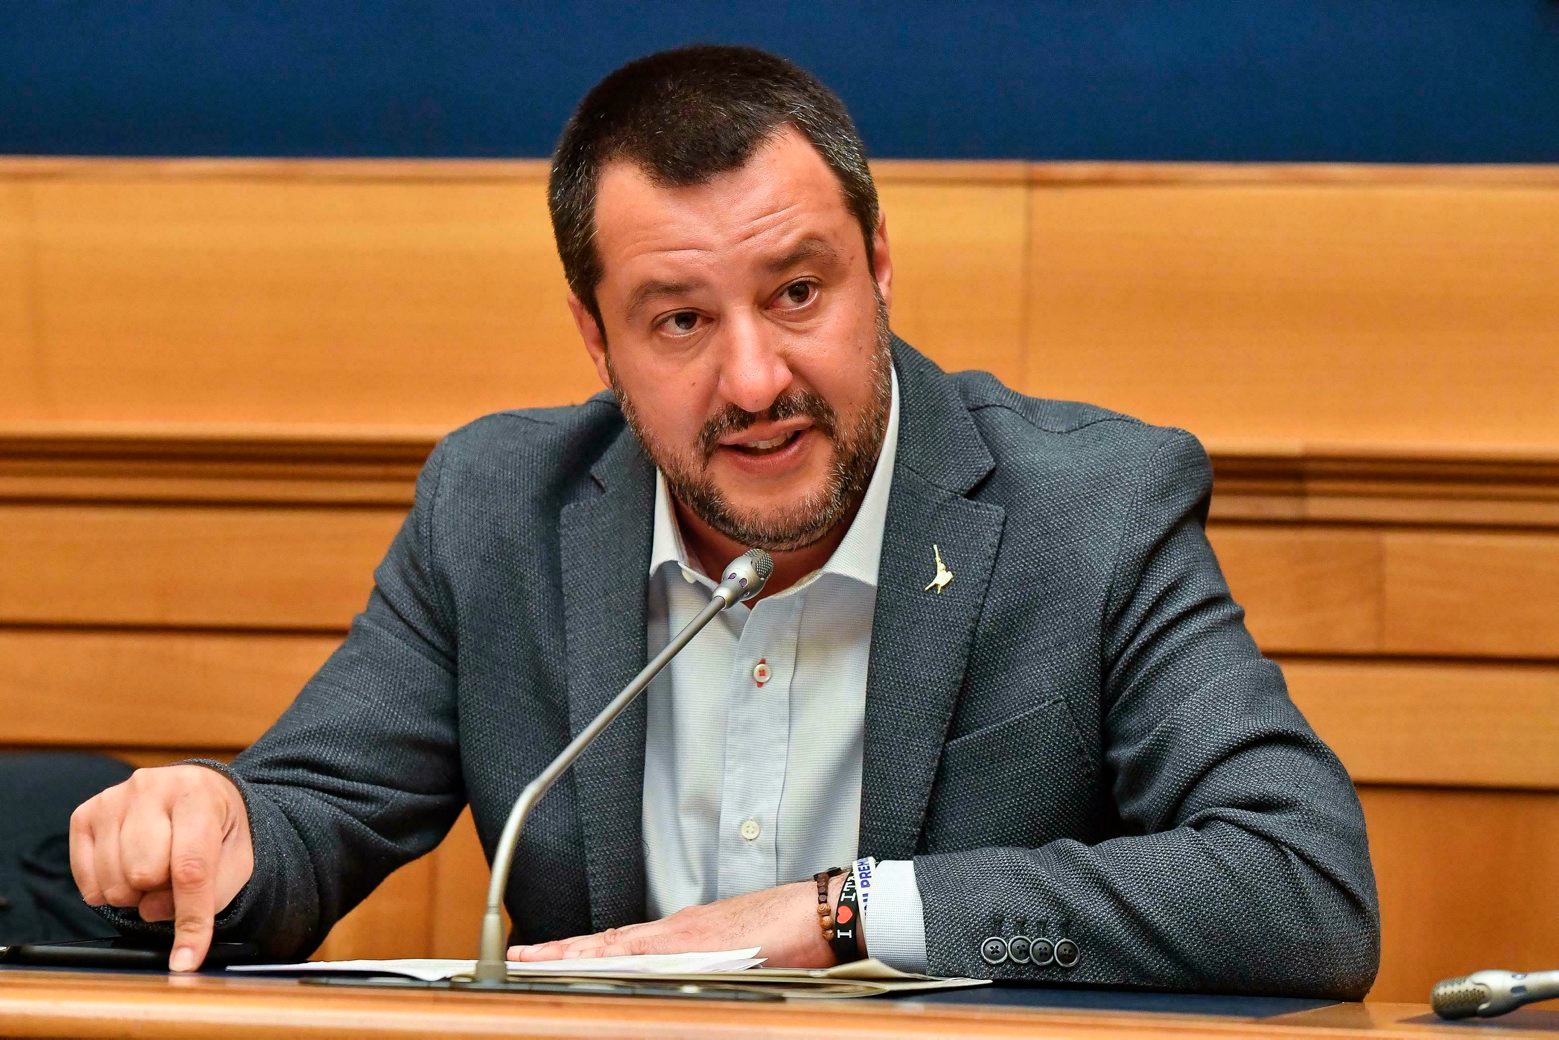 Italian Deputy Premier and Interior Minister Matteo Salvini speaks during a press conference at the Lower Chamber in Rome, Monday, March 4, 2019. (Alessandro Di Meo/ANSA via AP) Italy Politics